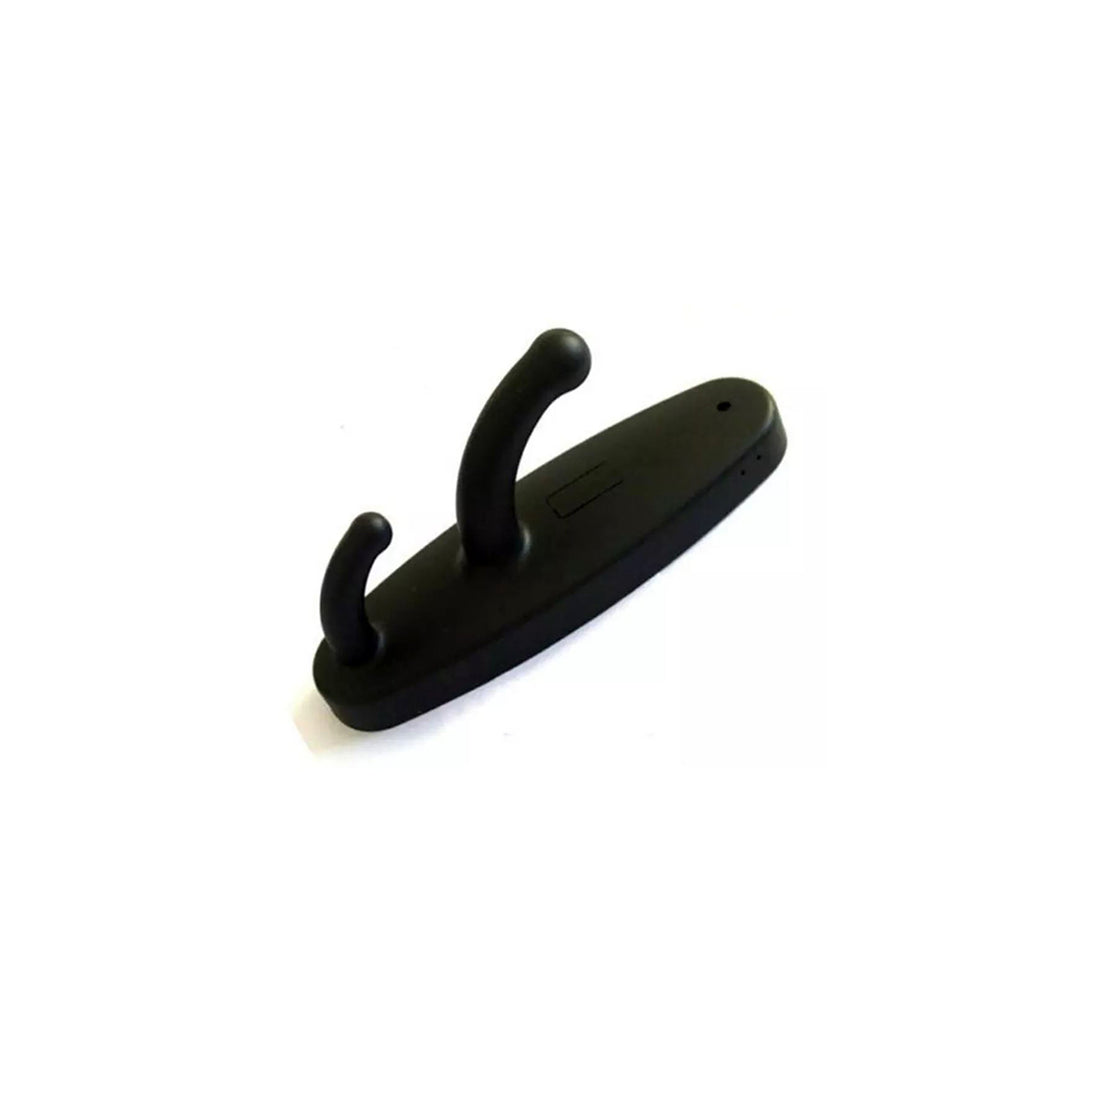 Clothes Hook Motion Detector Spy Camera - Black or White